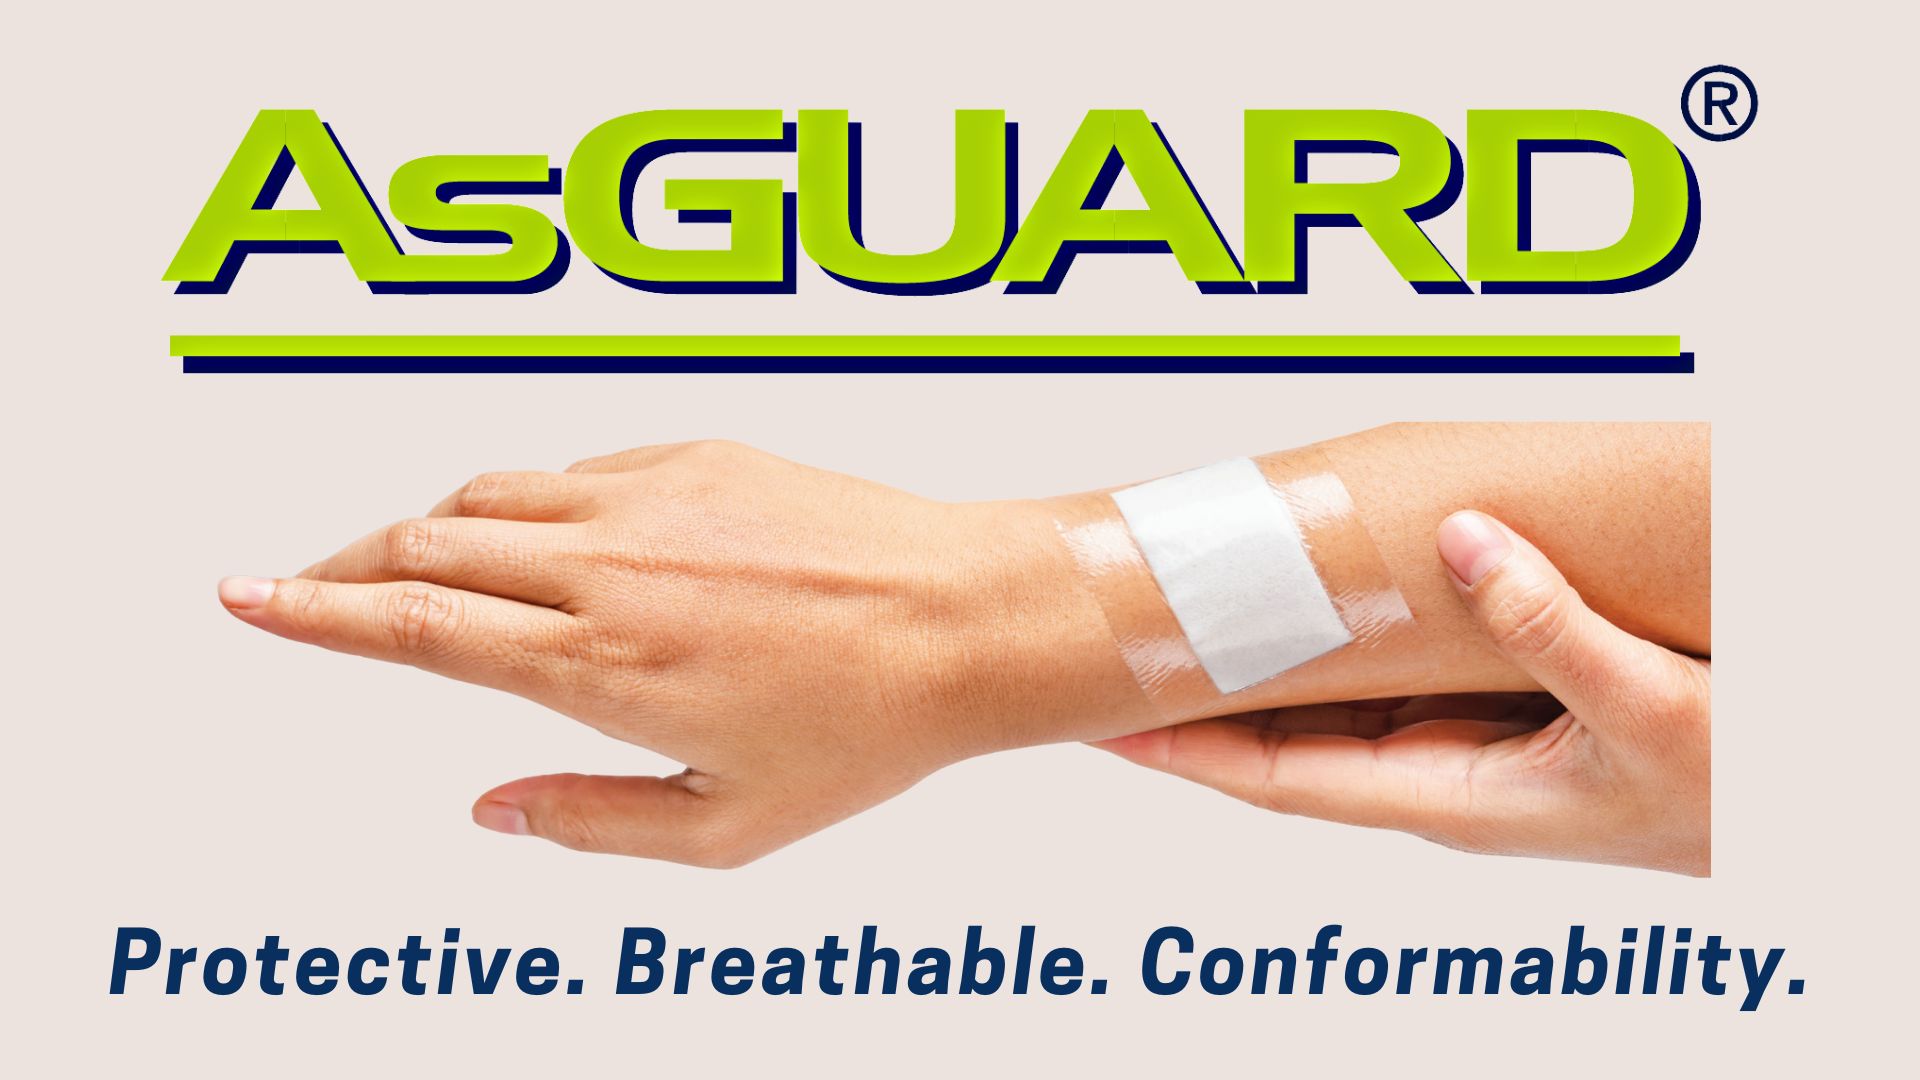 AsGuard: Protective. Breathable. Conformability.